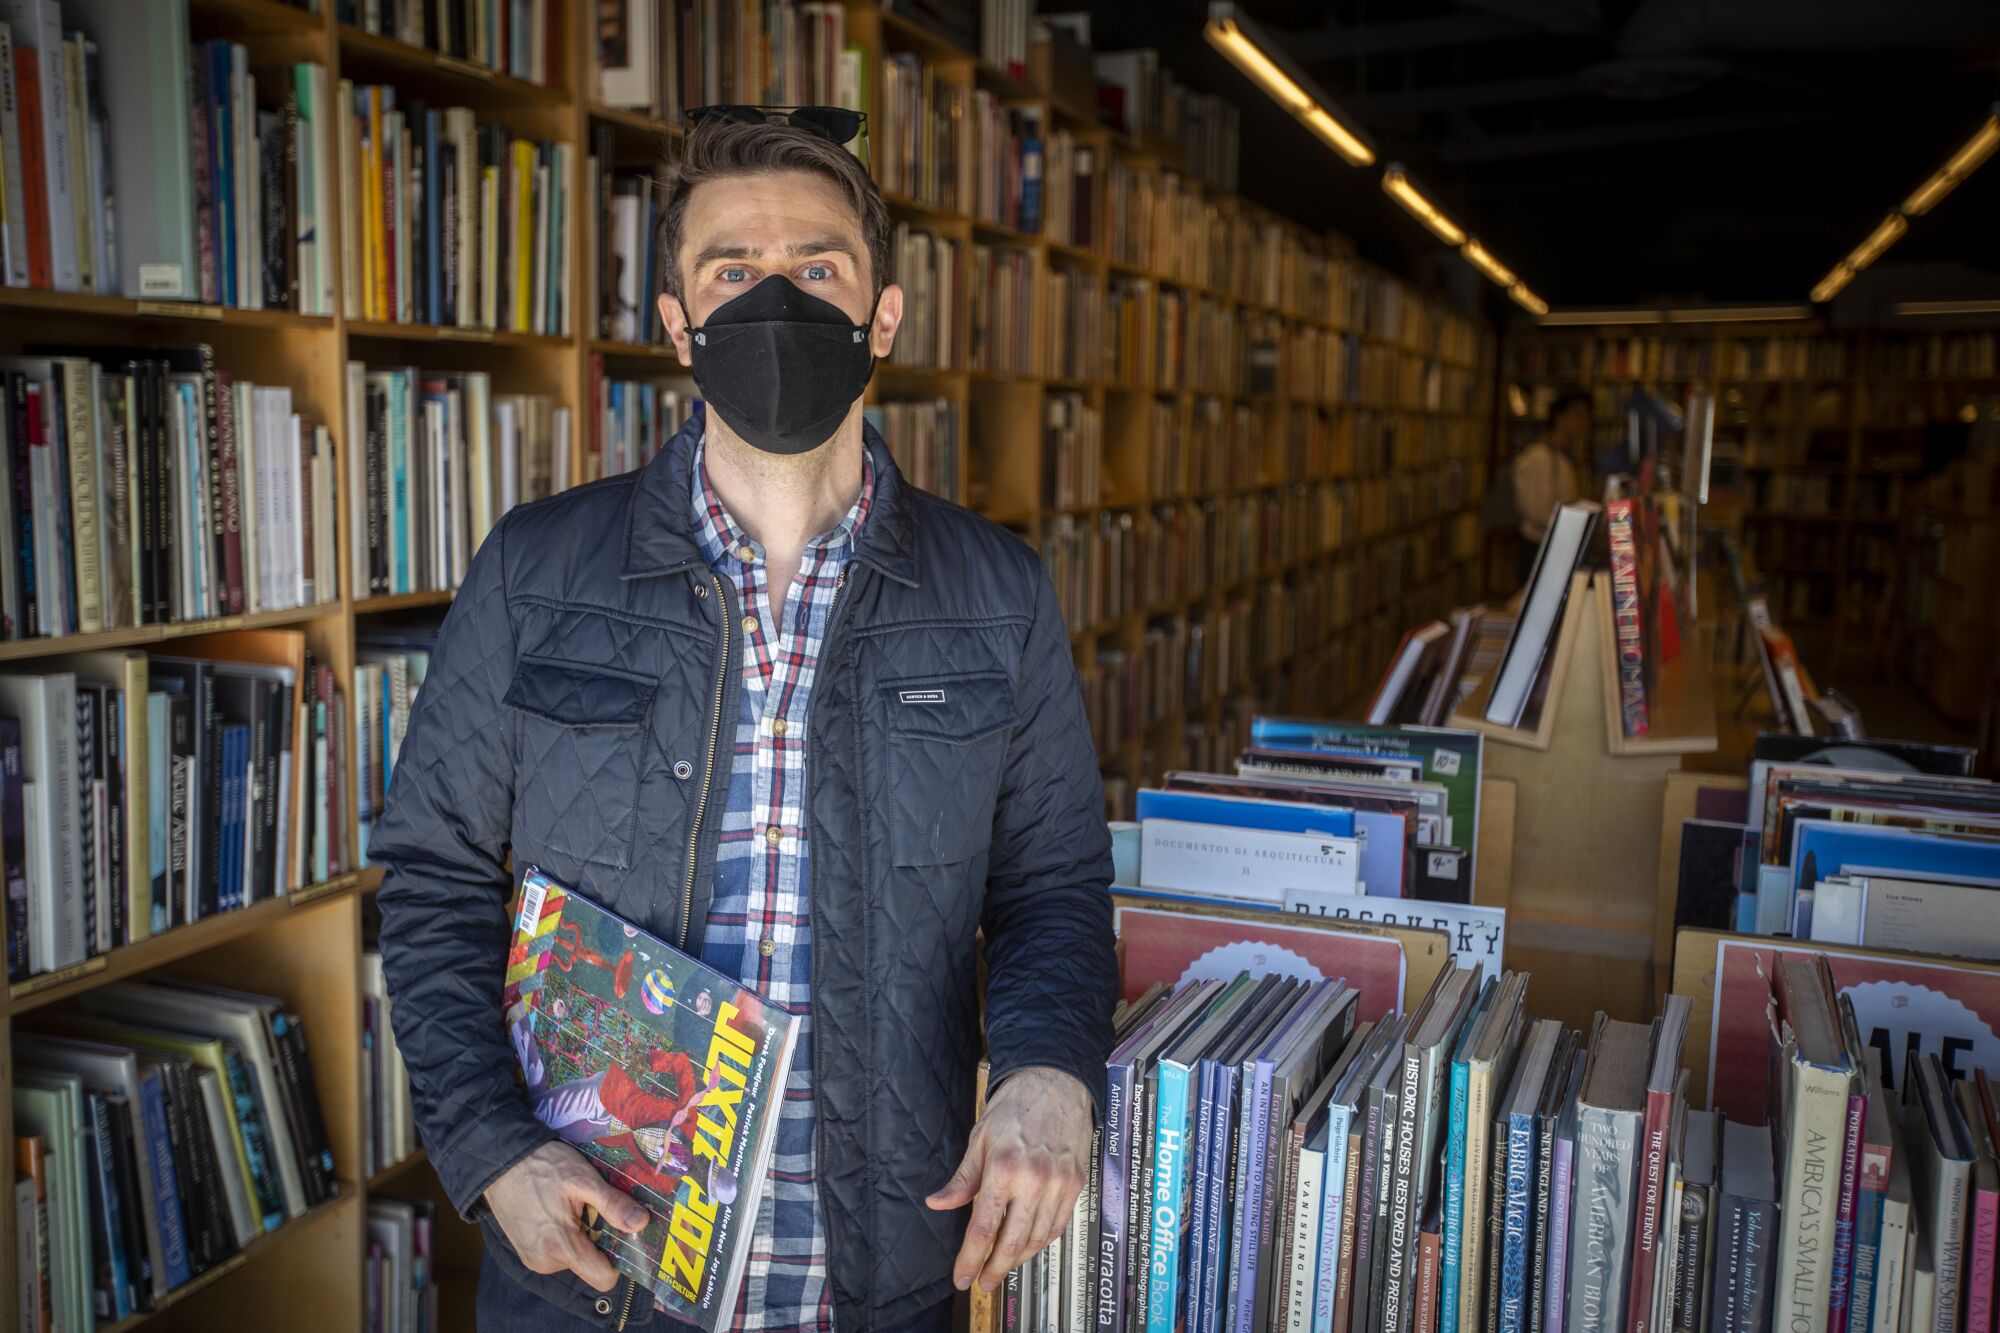 A man wearing a quilted jacket and a face mask in a bookstore.